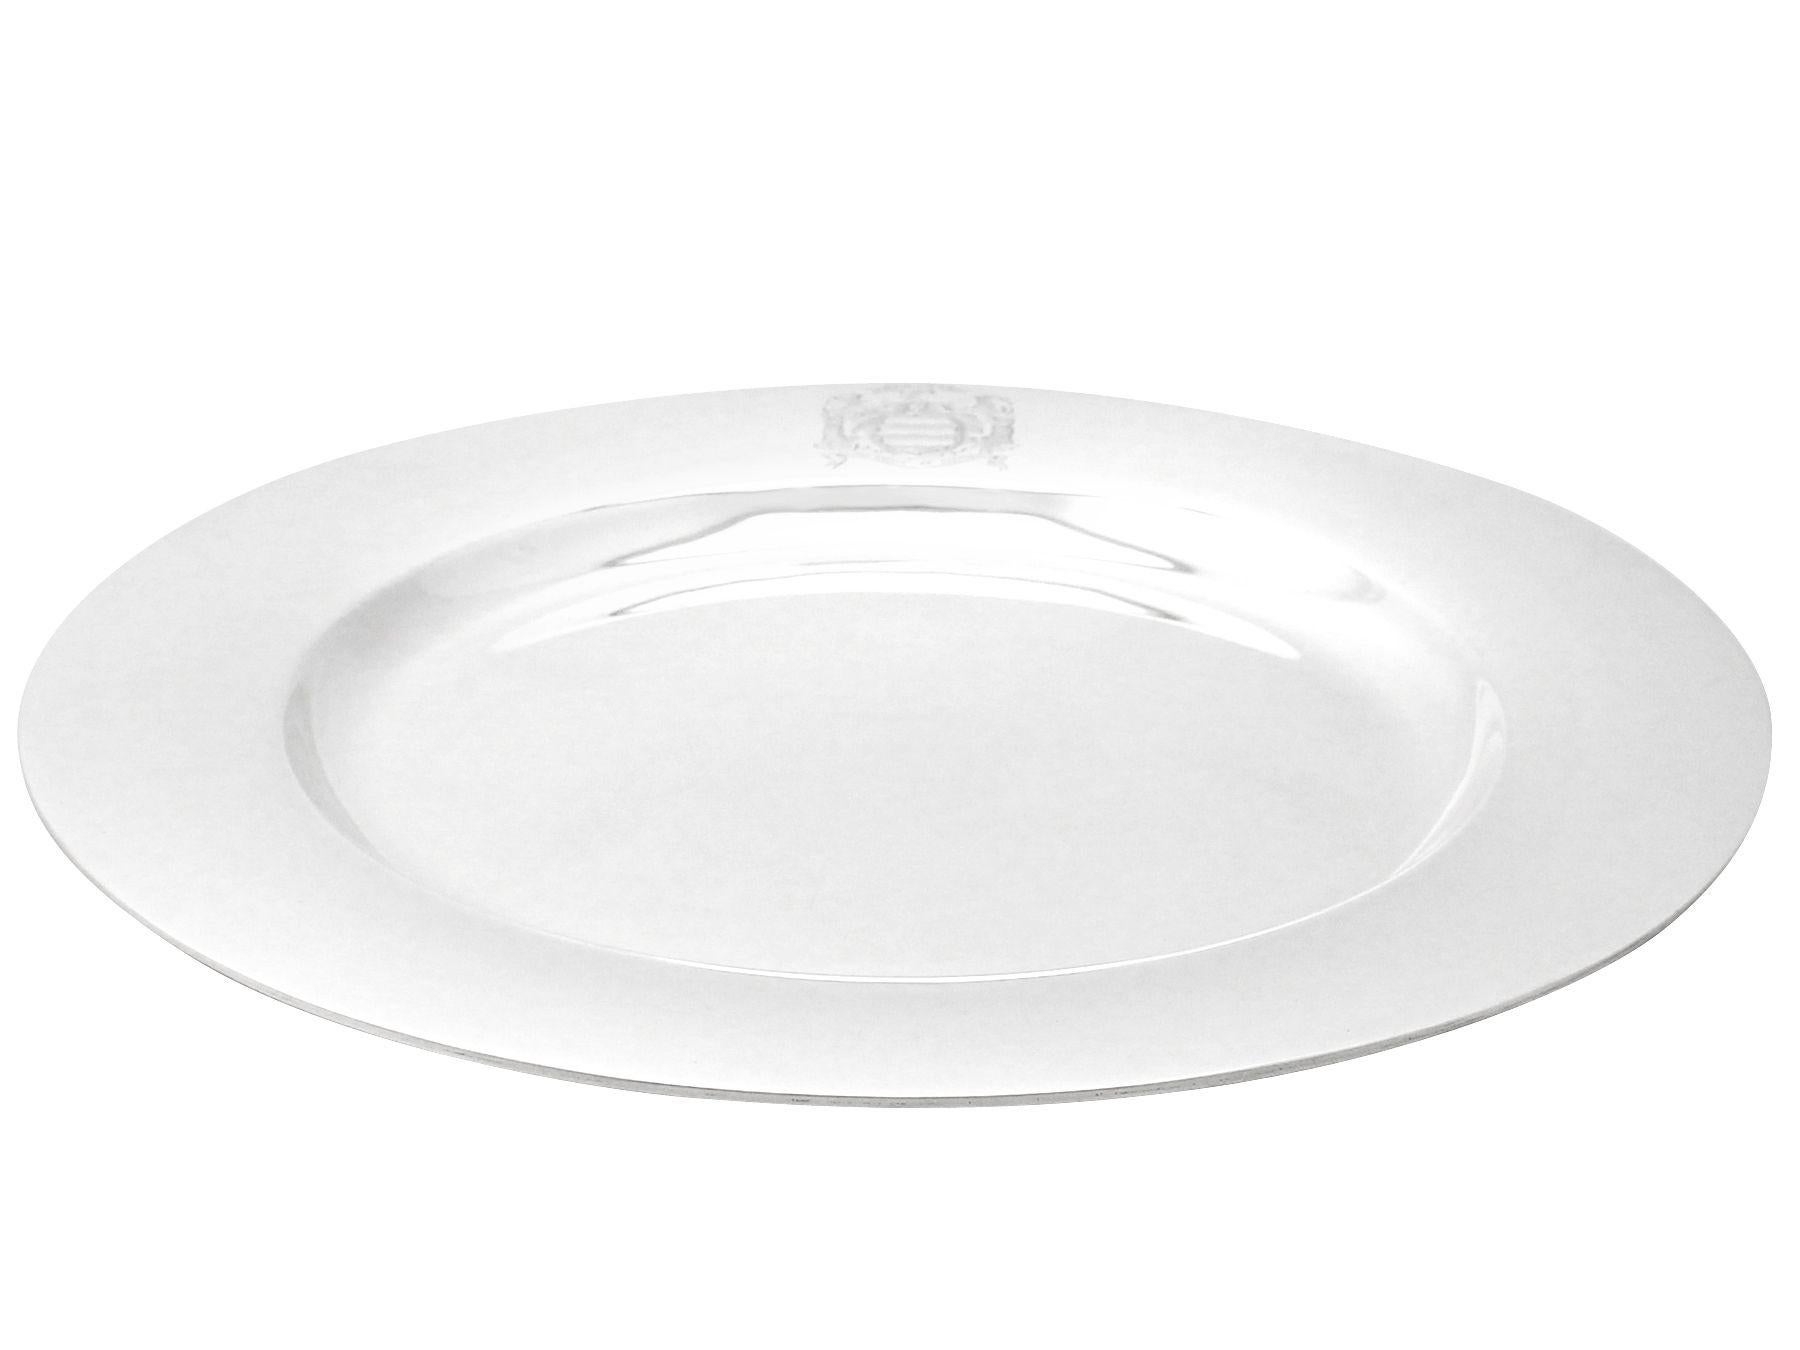 An exceptional, fine and impressive, large antique American sterling silver plate; an addition to our dining silverware collection.

This exceptional American sterling silver plate has a plain circular rounded form with a plain circular central